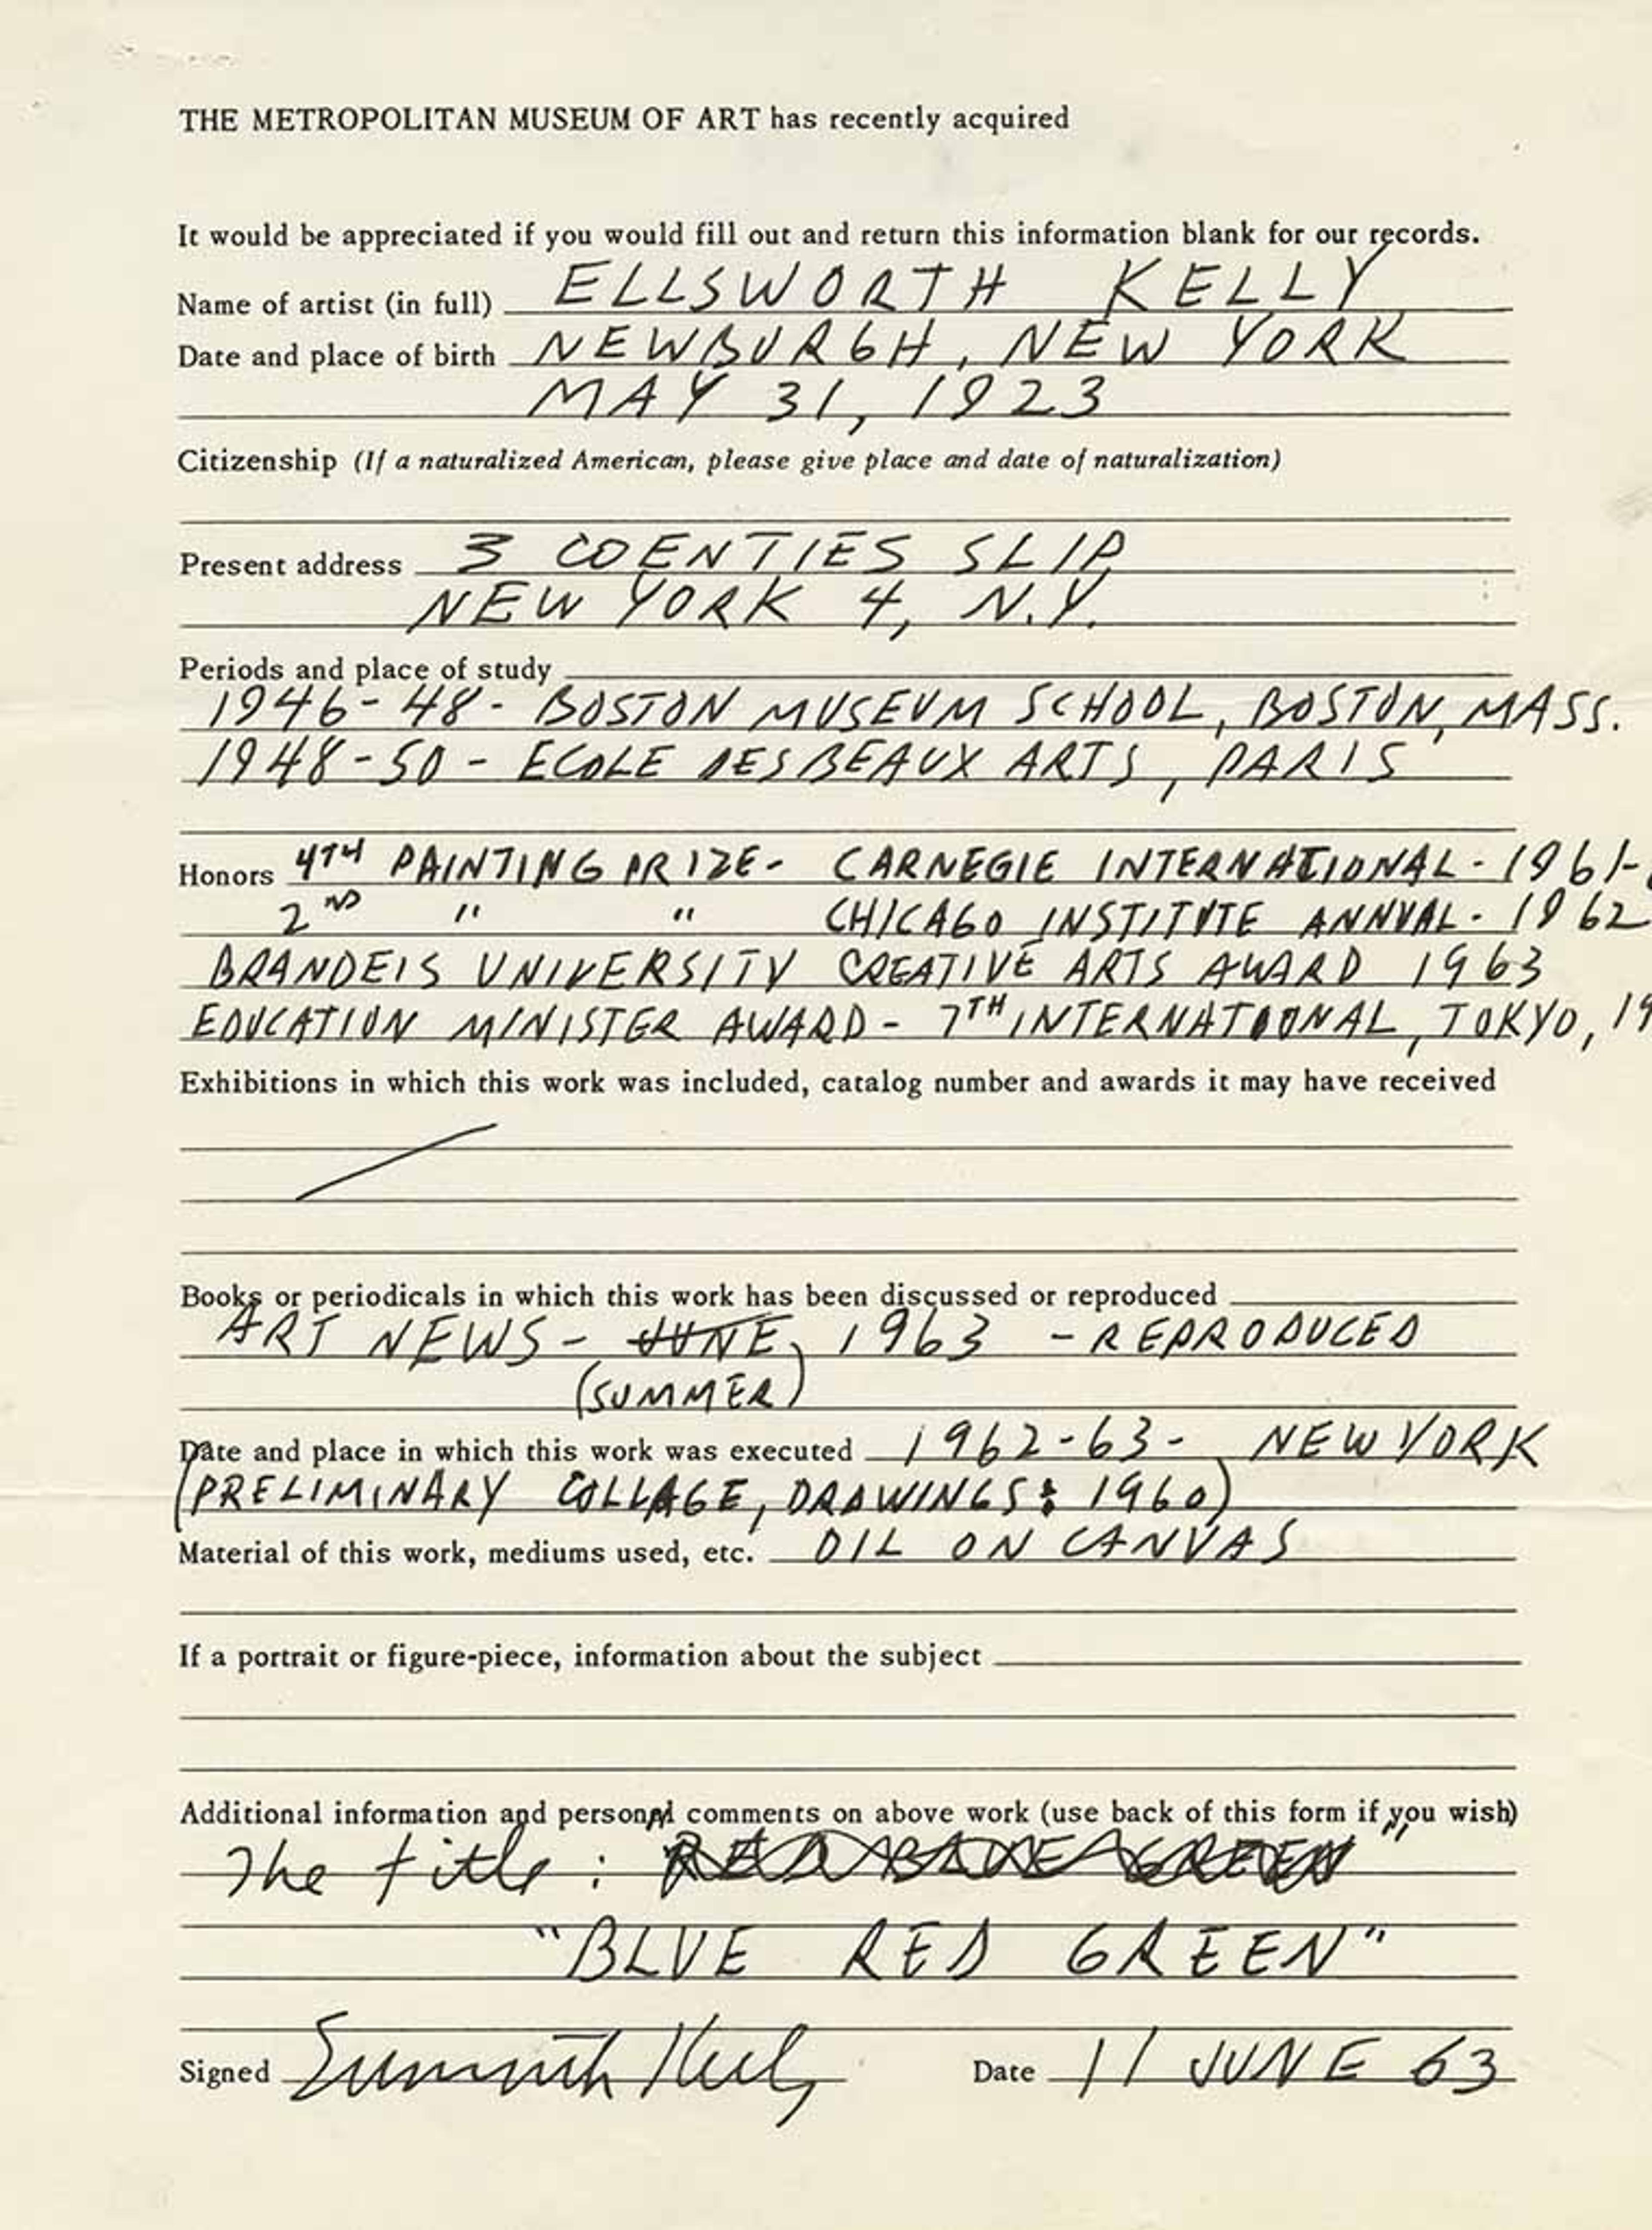 An intake form filled out by artist Ellsworth Kelly.